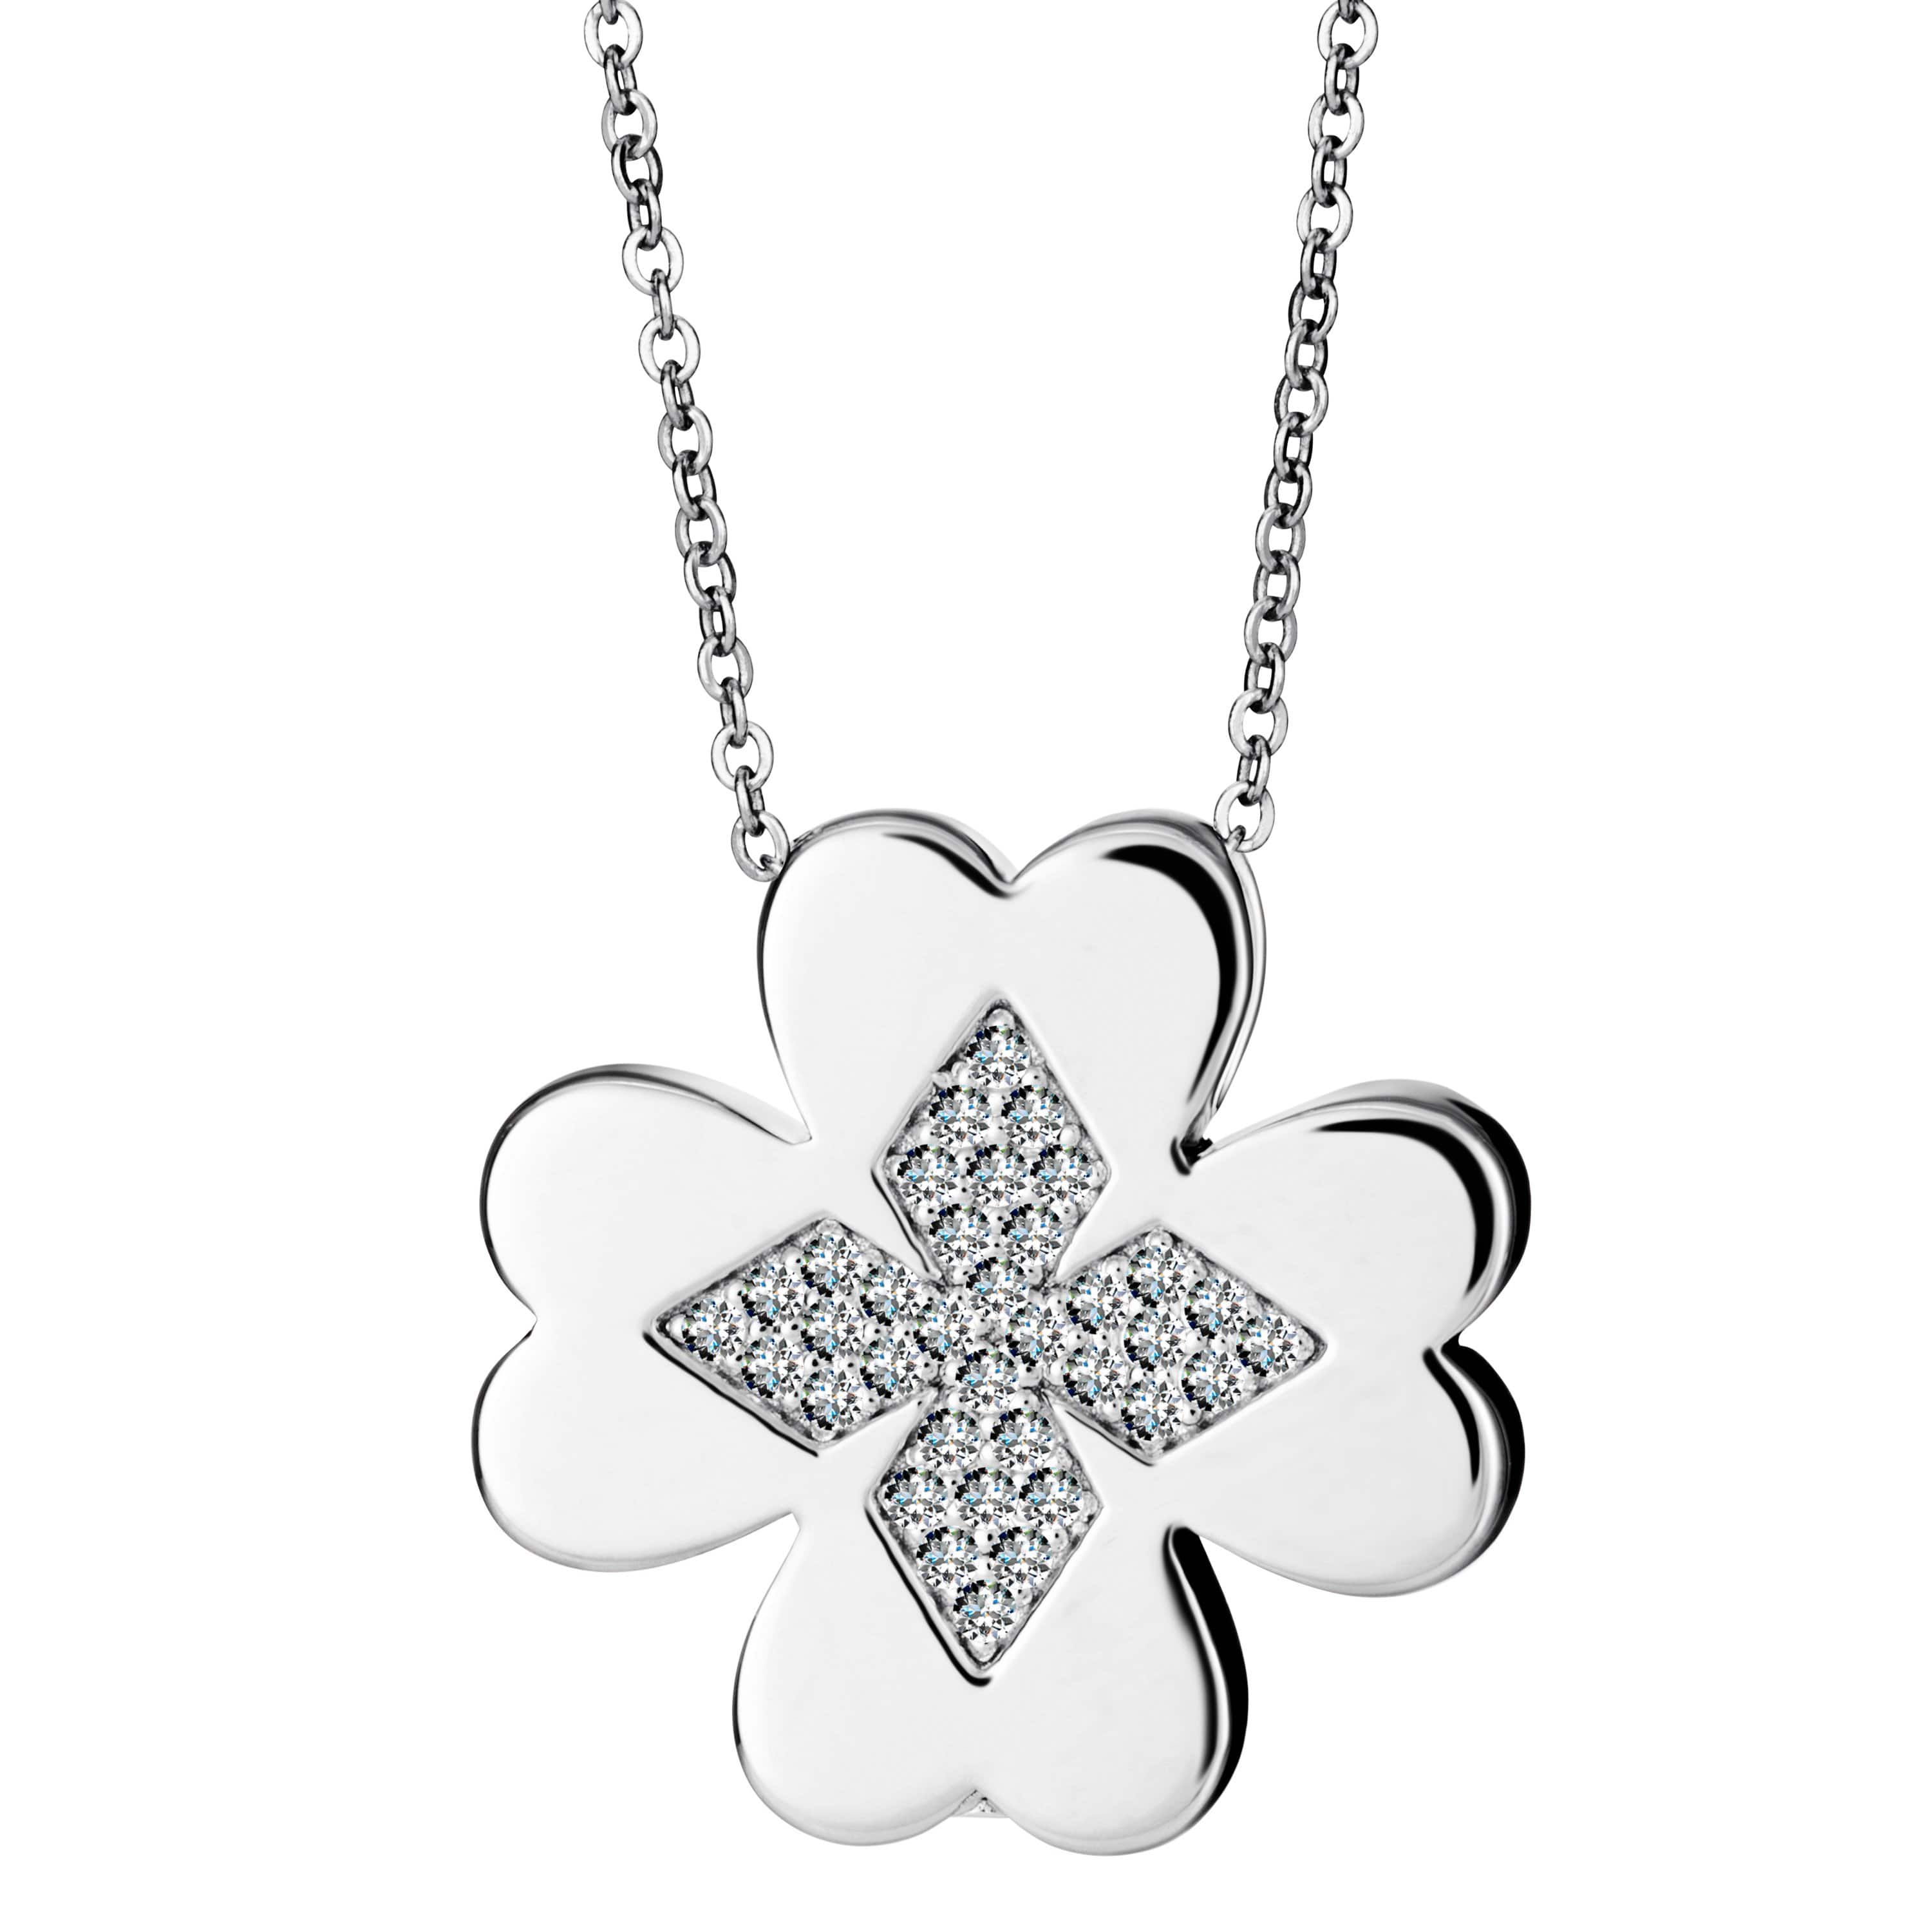 Self-fill Clover Memorial Ashes Pendant with Crystals